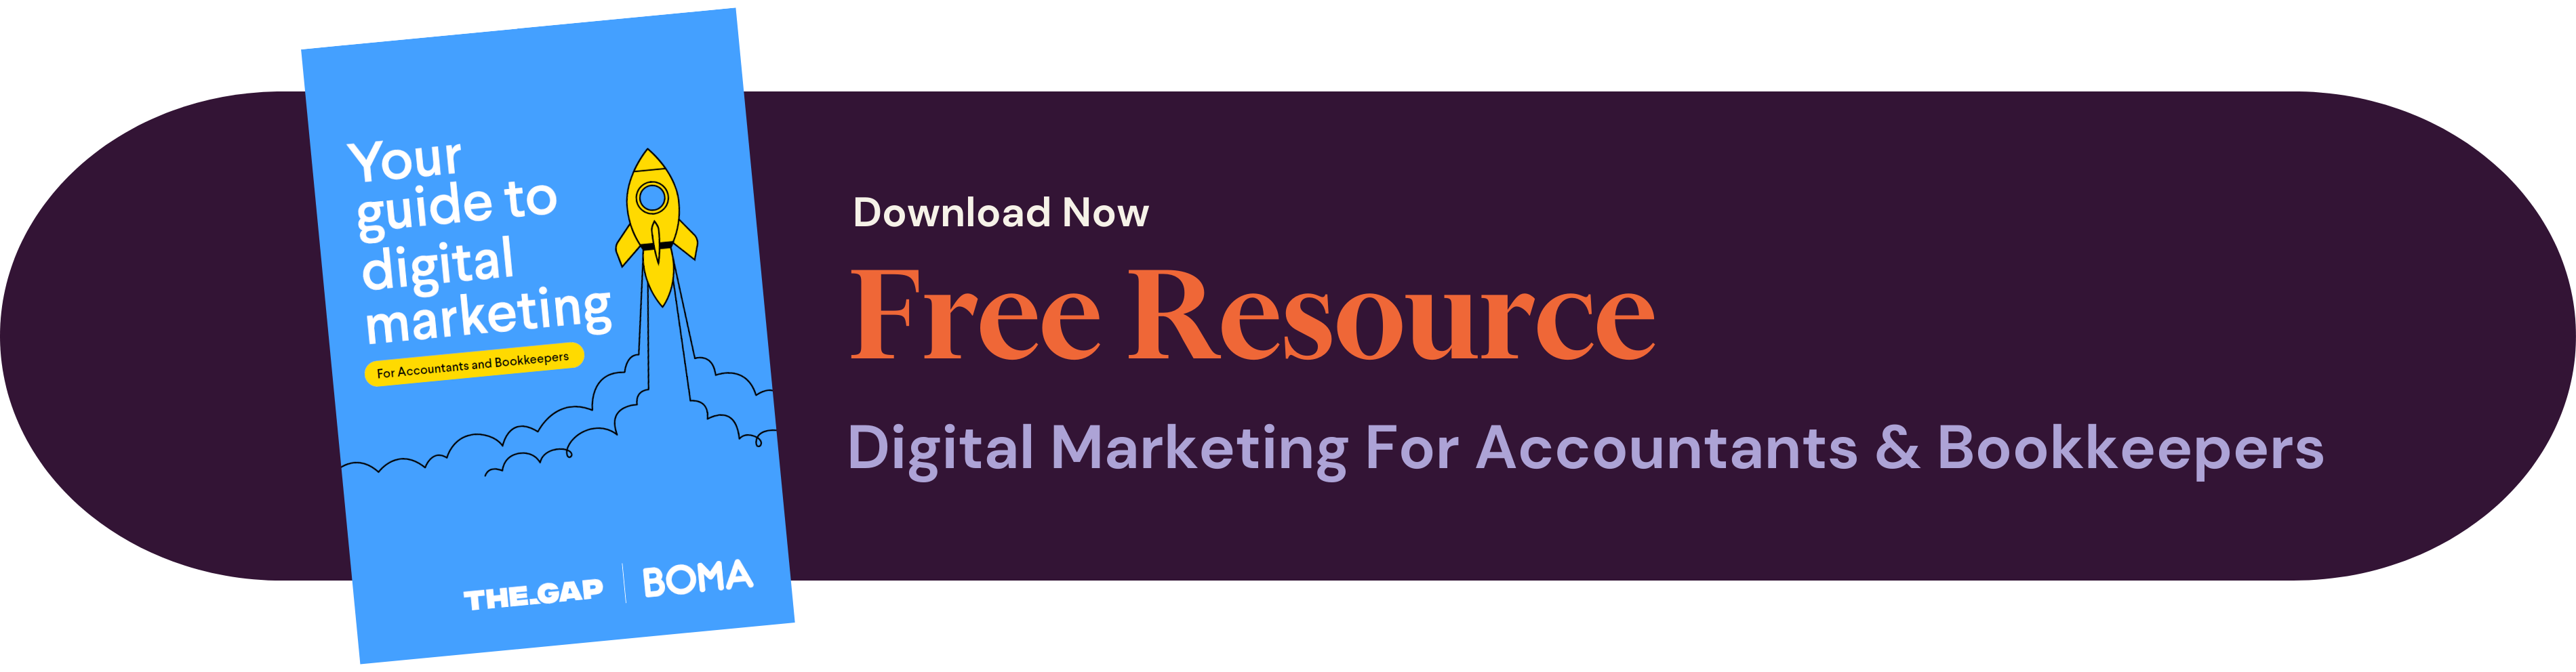 Download Banner - Digital Marketing for Accountants & Bookkeepers (2)-1